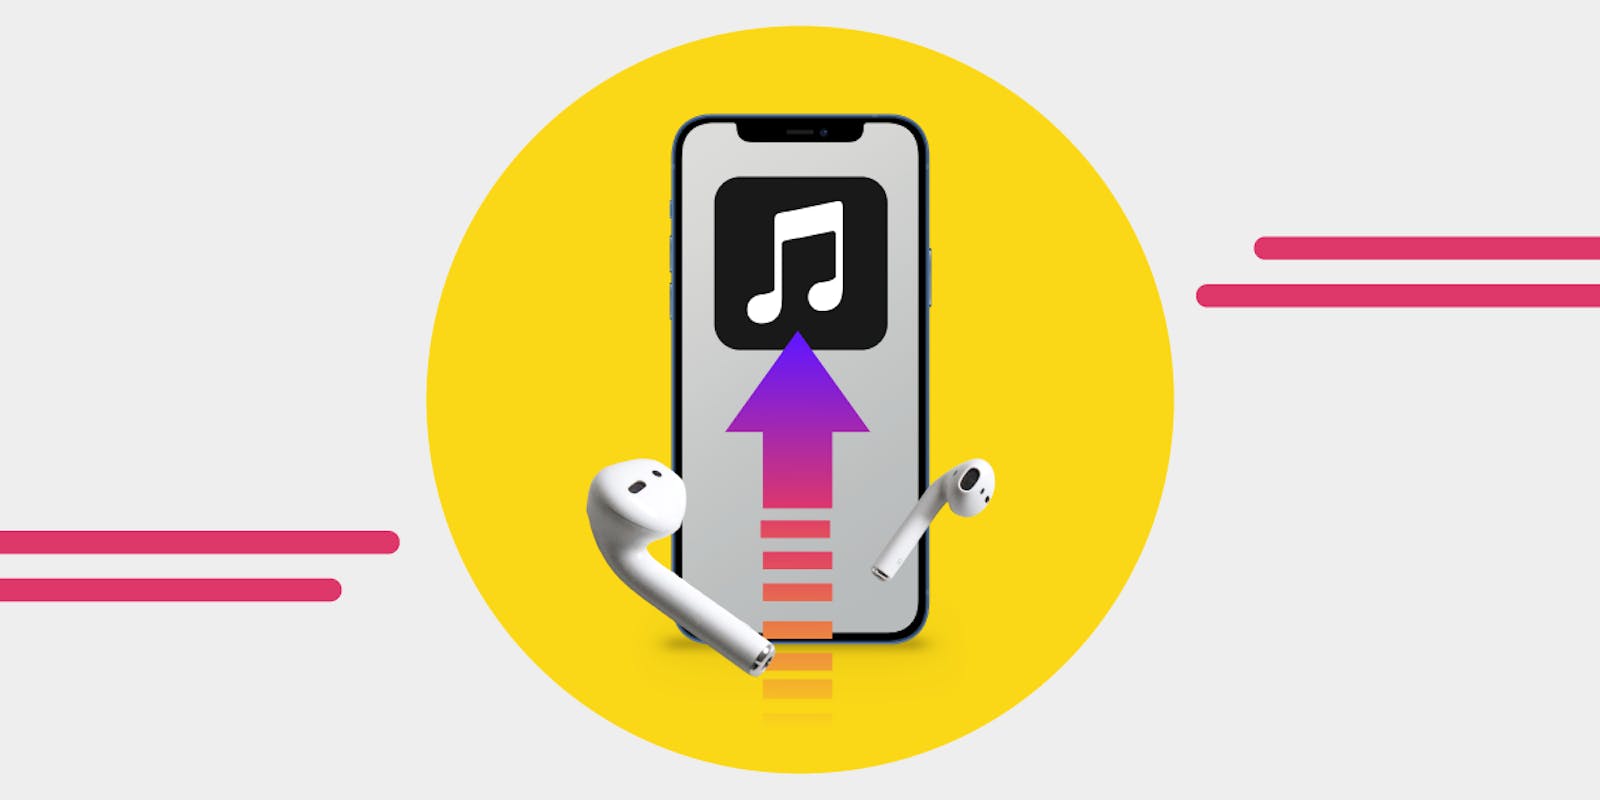 App Insights: Free Music & Player : Streaming & Music Download